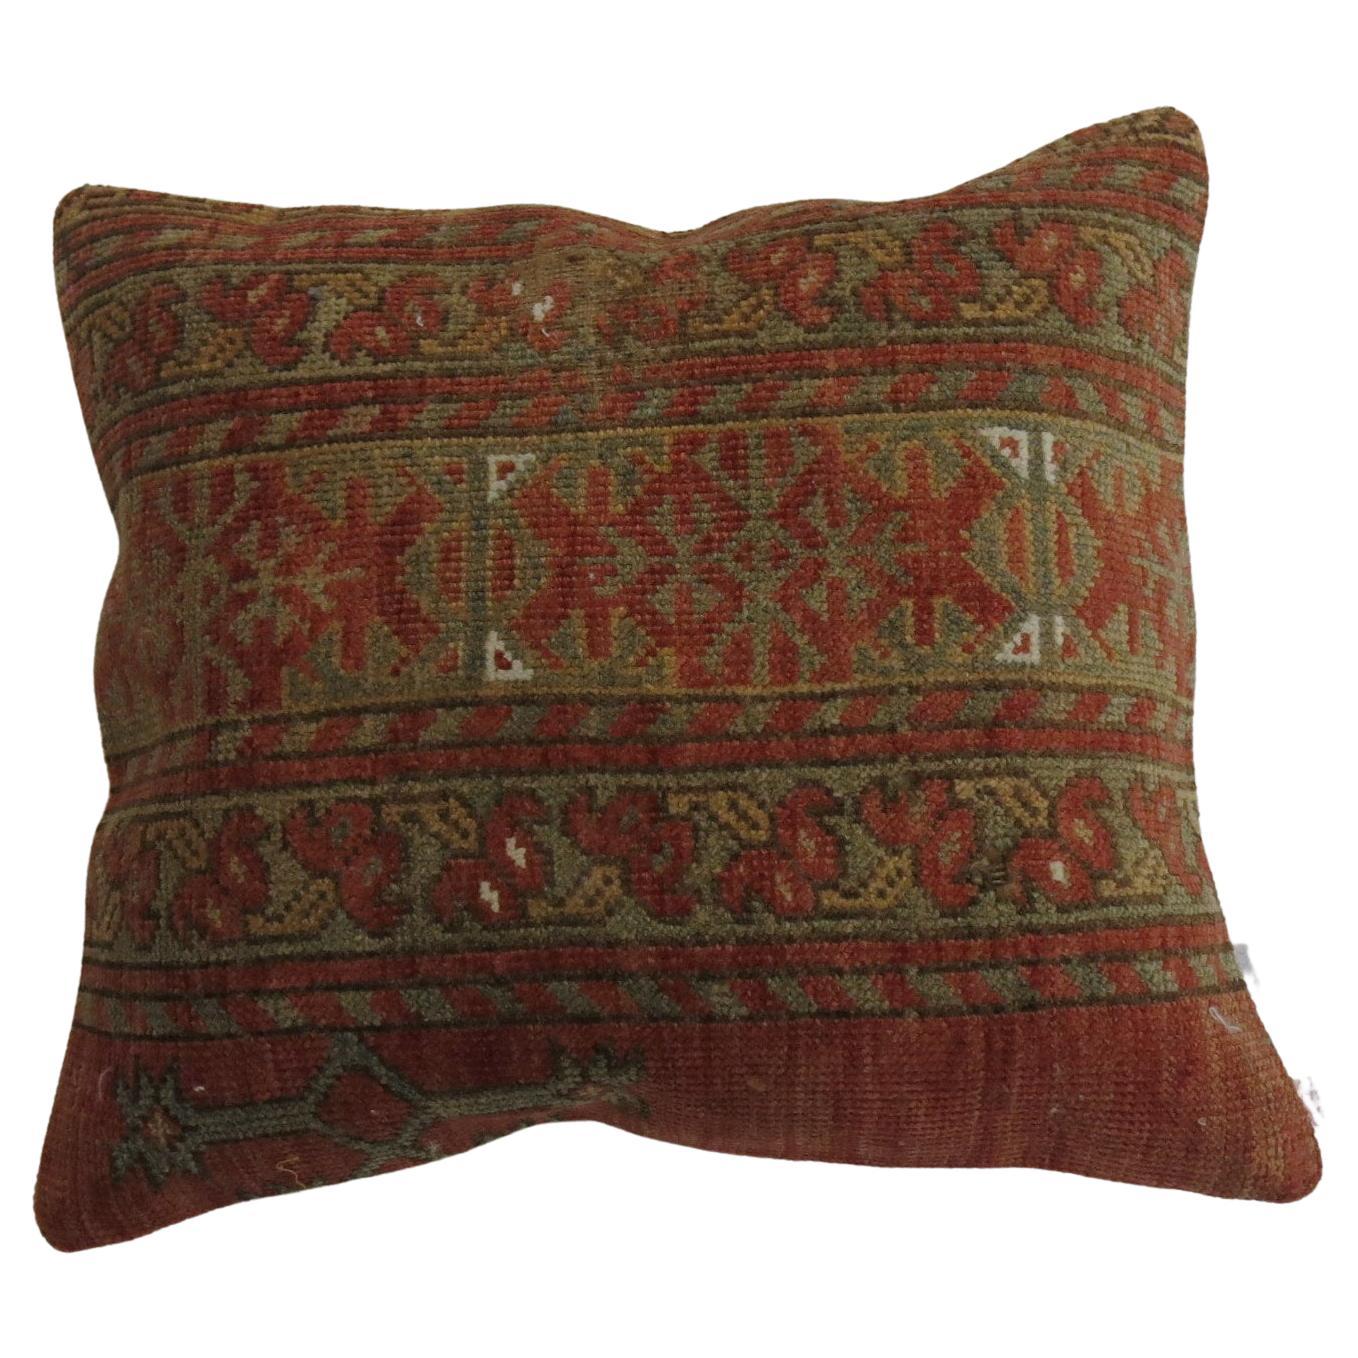 Pillow made from a 19th-century antique Ersari rug with cotton back and zipper closure.

Measures: 14'' x 16''.